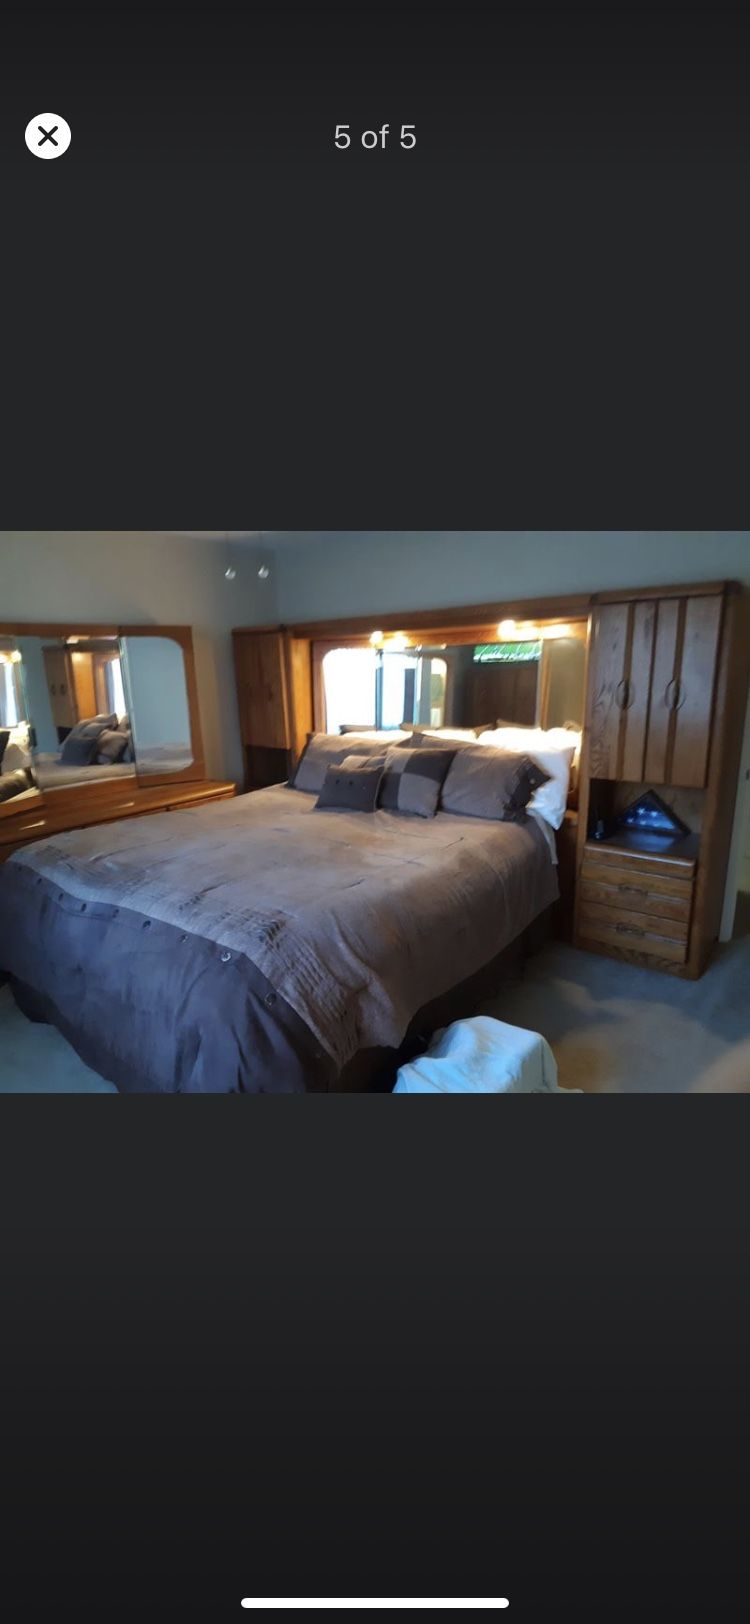 King size bedroom set/ bedframe not included/5 pieces/ really good condition.